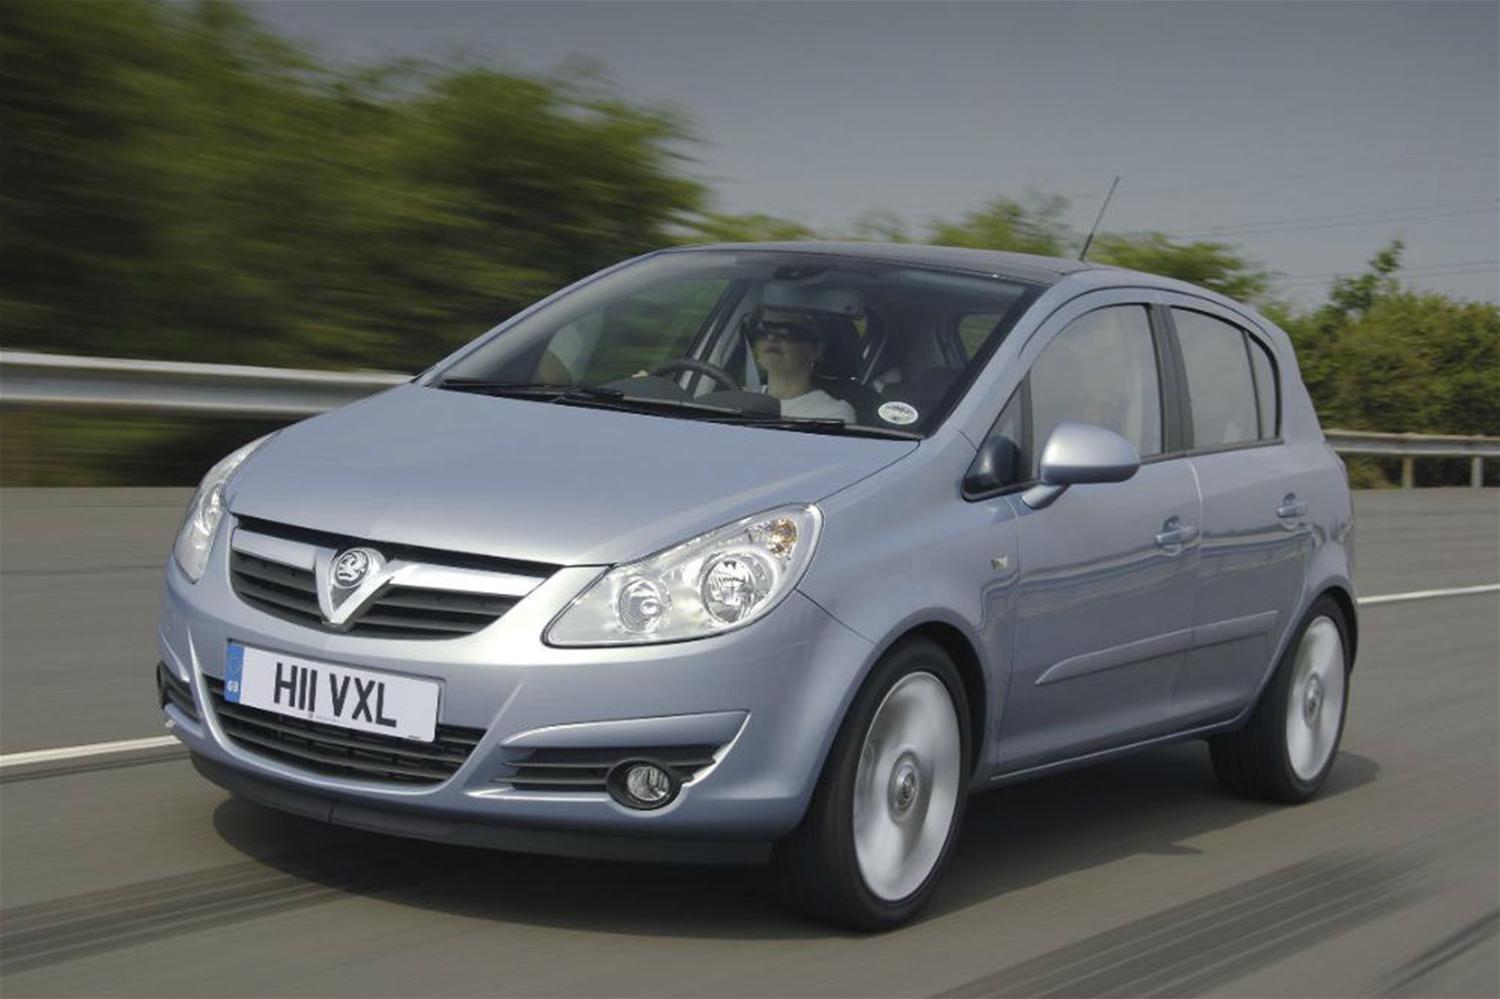 Best used small cars for under £3,000 - Car News, Reviews & Buyers Guides